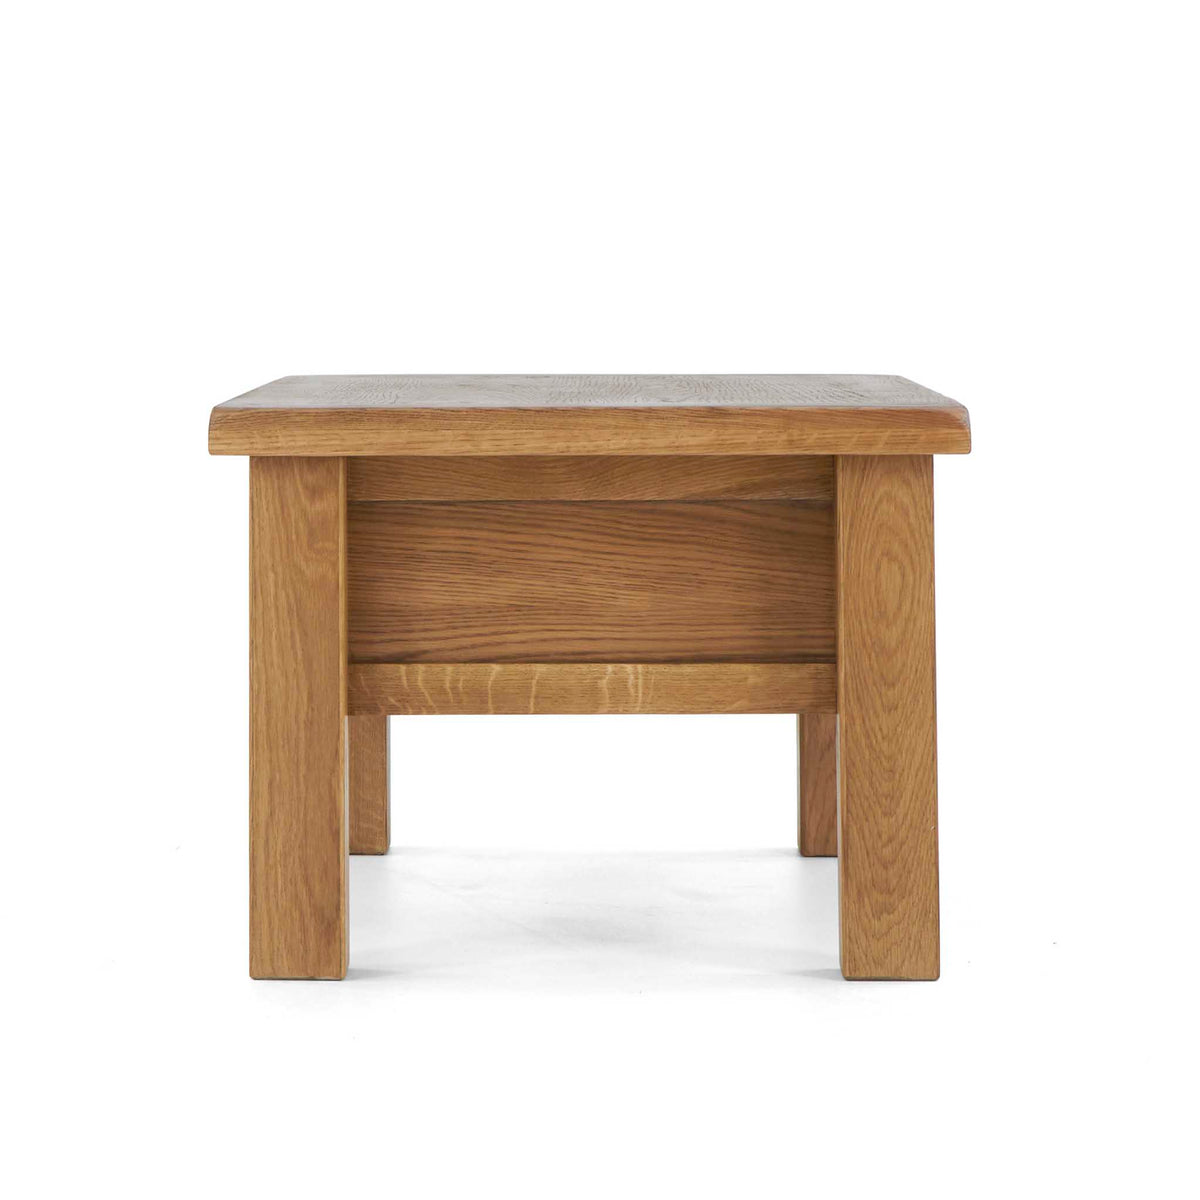 Zelah Oak Coffee Table with Drawer - End view